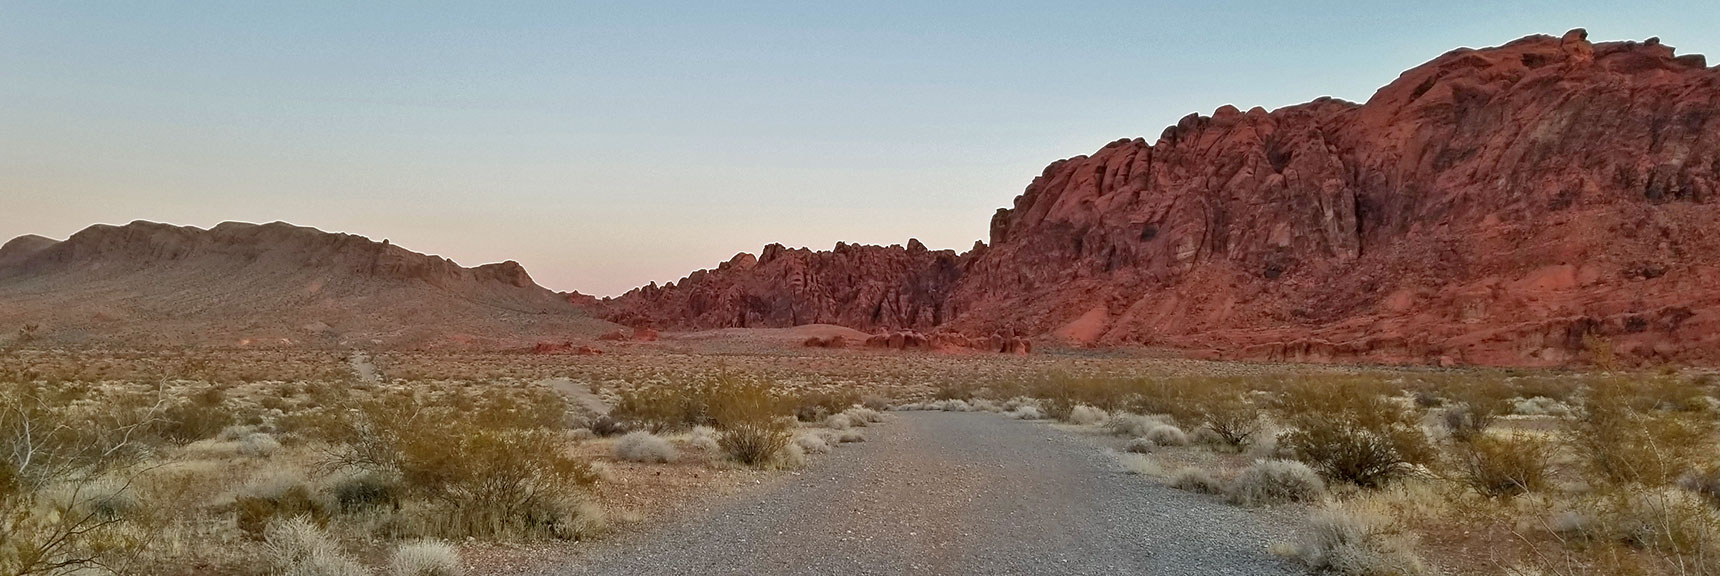 Starting Out on the Graded Road at the Trailhead for Prospect Trail in Valley of Fire State Park, Nevada